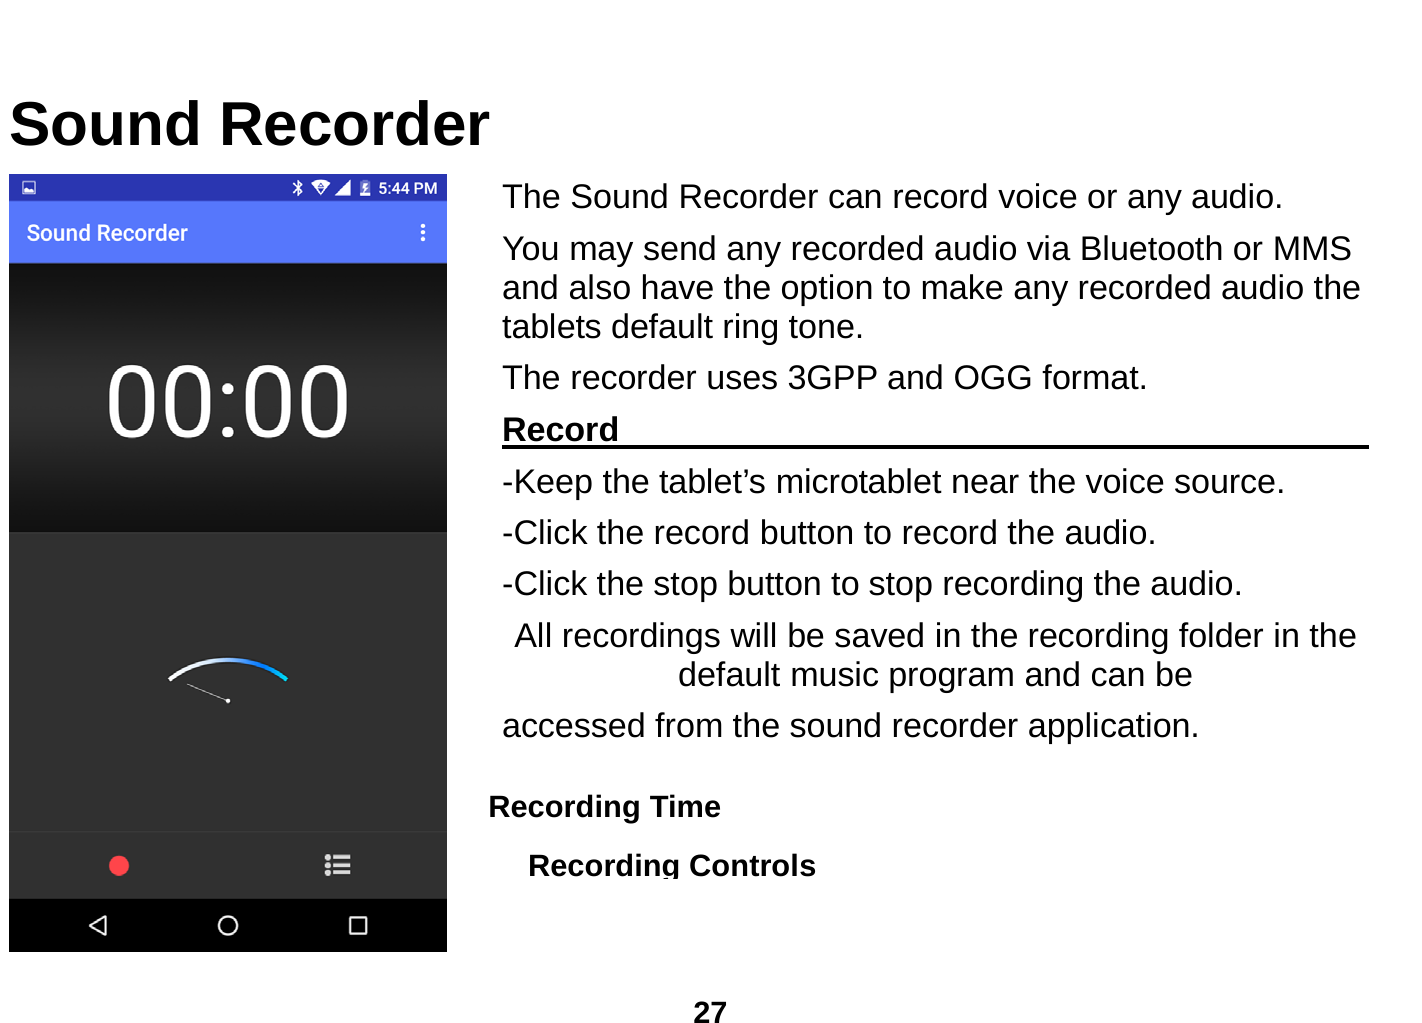  27  Sound Recorder The Sound Recorder can record voice or any audio.   You may send any recorded audio via Bluetooth or MMS and also have the option to make any recorded audio the tablets default ring tone. The recorder uses 3GPP and OGG format. Record                                                         -Keep the tablet’s microtablet near the voice source. -Click the record button to record the audio. -Click the stop button to stop recording the audio. All recordings will be saved in the recording folder in the default music program and can be   accessed from the sound recorder application.    Recording Controls Recording Time  